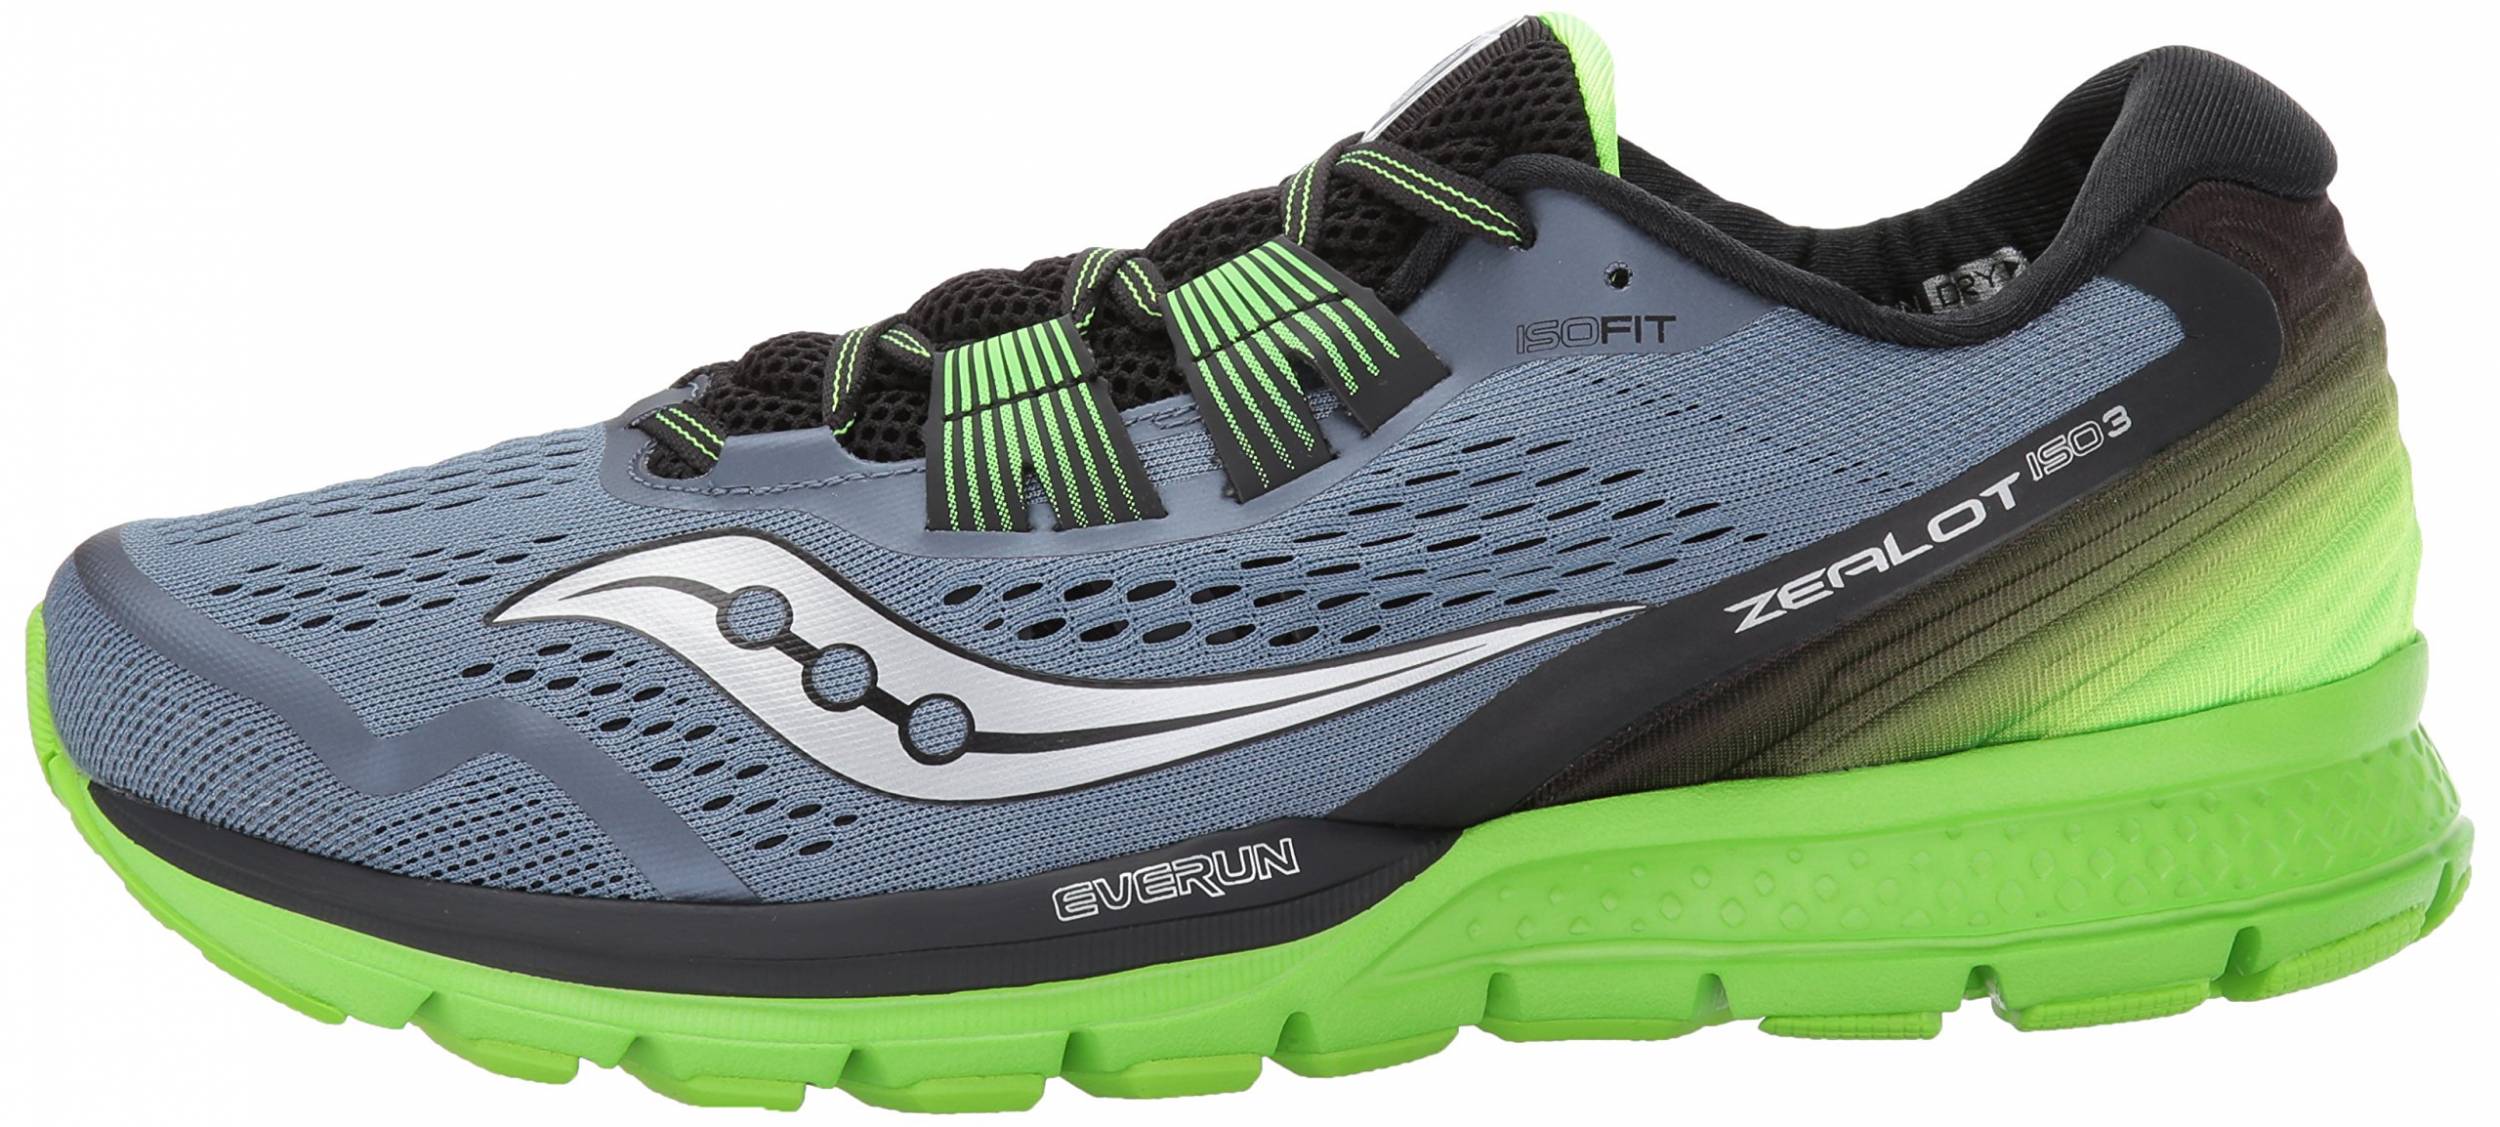 Saucony Zealot ISO 3 Review 2022, Facts 